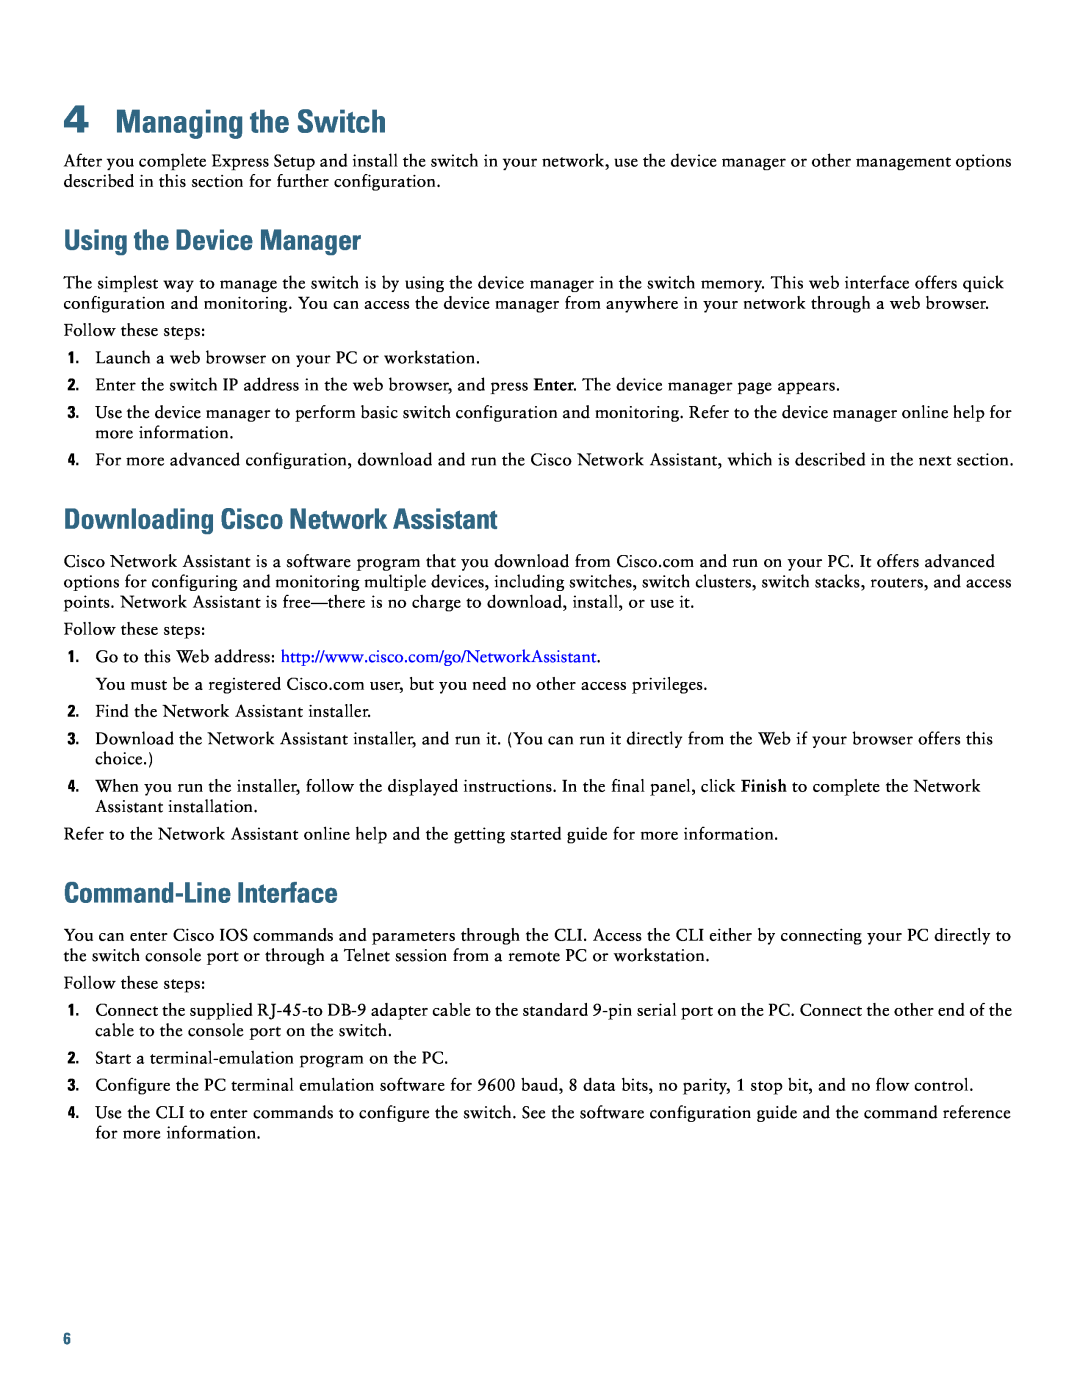 Cisco Systems 2975 manual Managing the Switch, Using the Device Manager, Downloading Cisco Network Assistant 